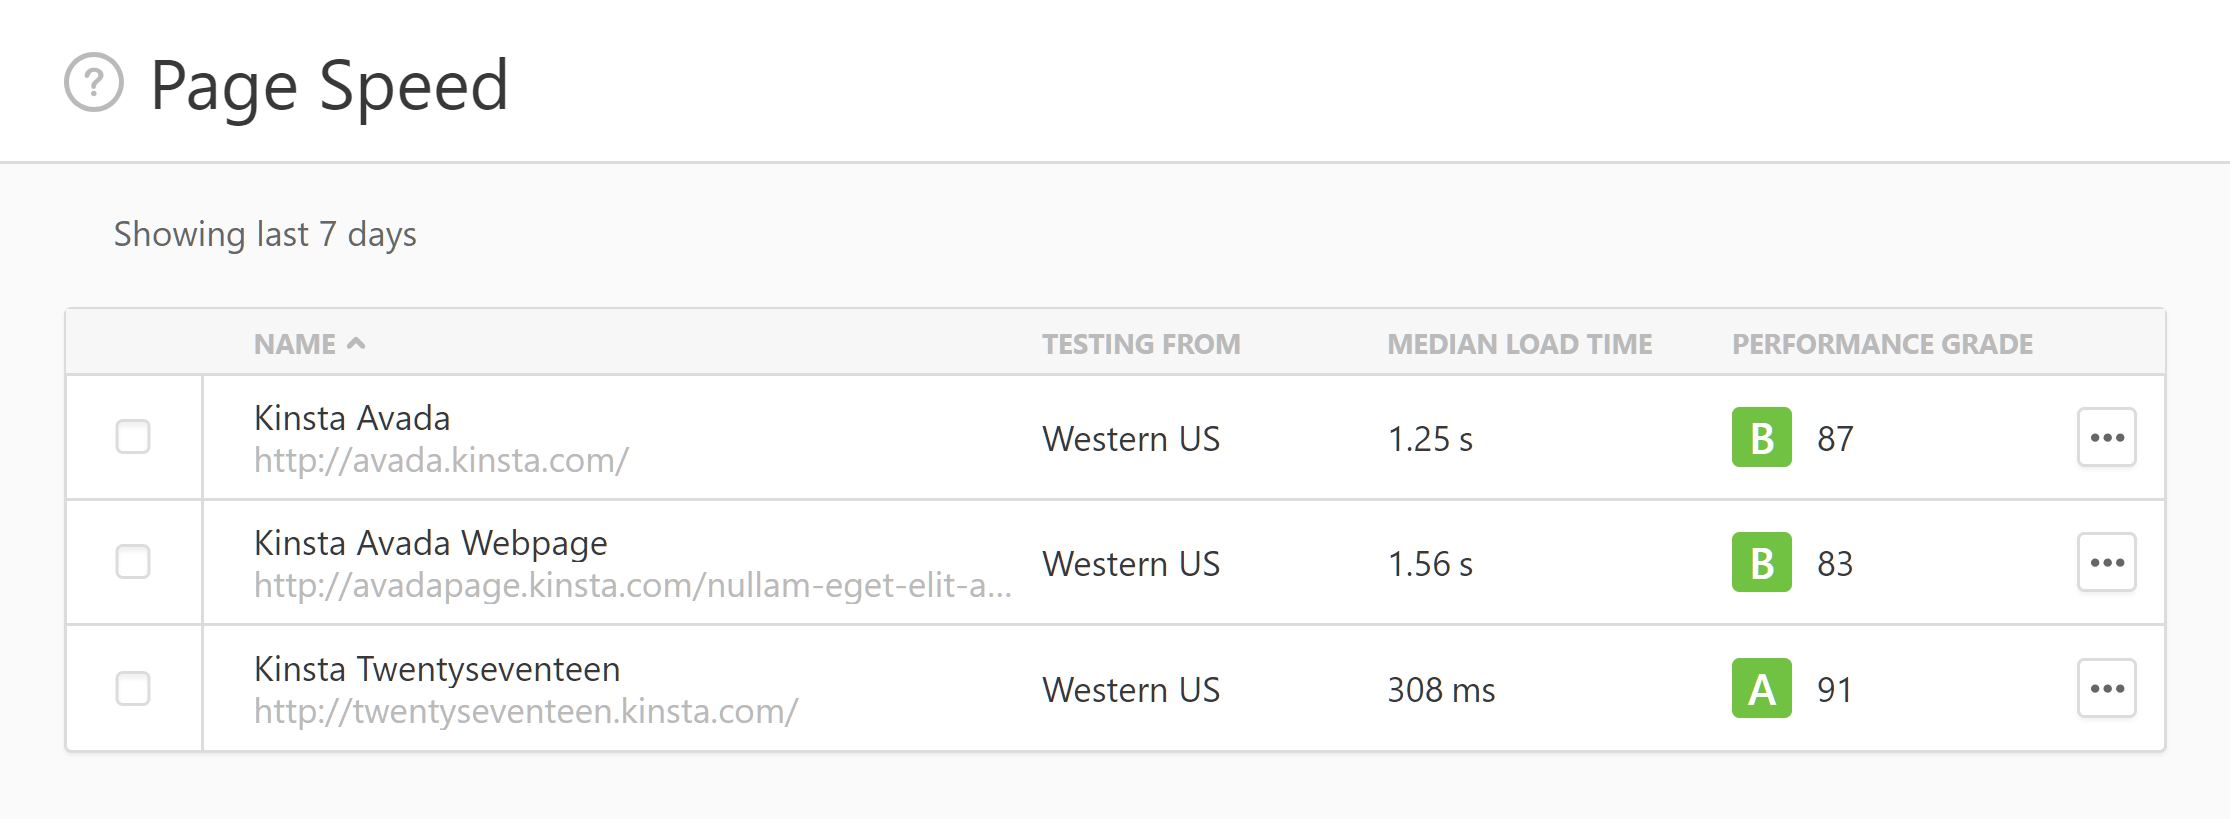 Kinsta Page Speed Pingdom Test Results